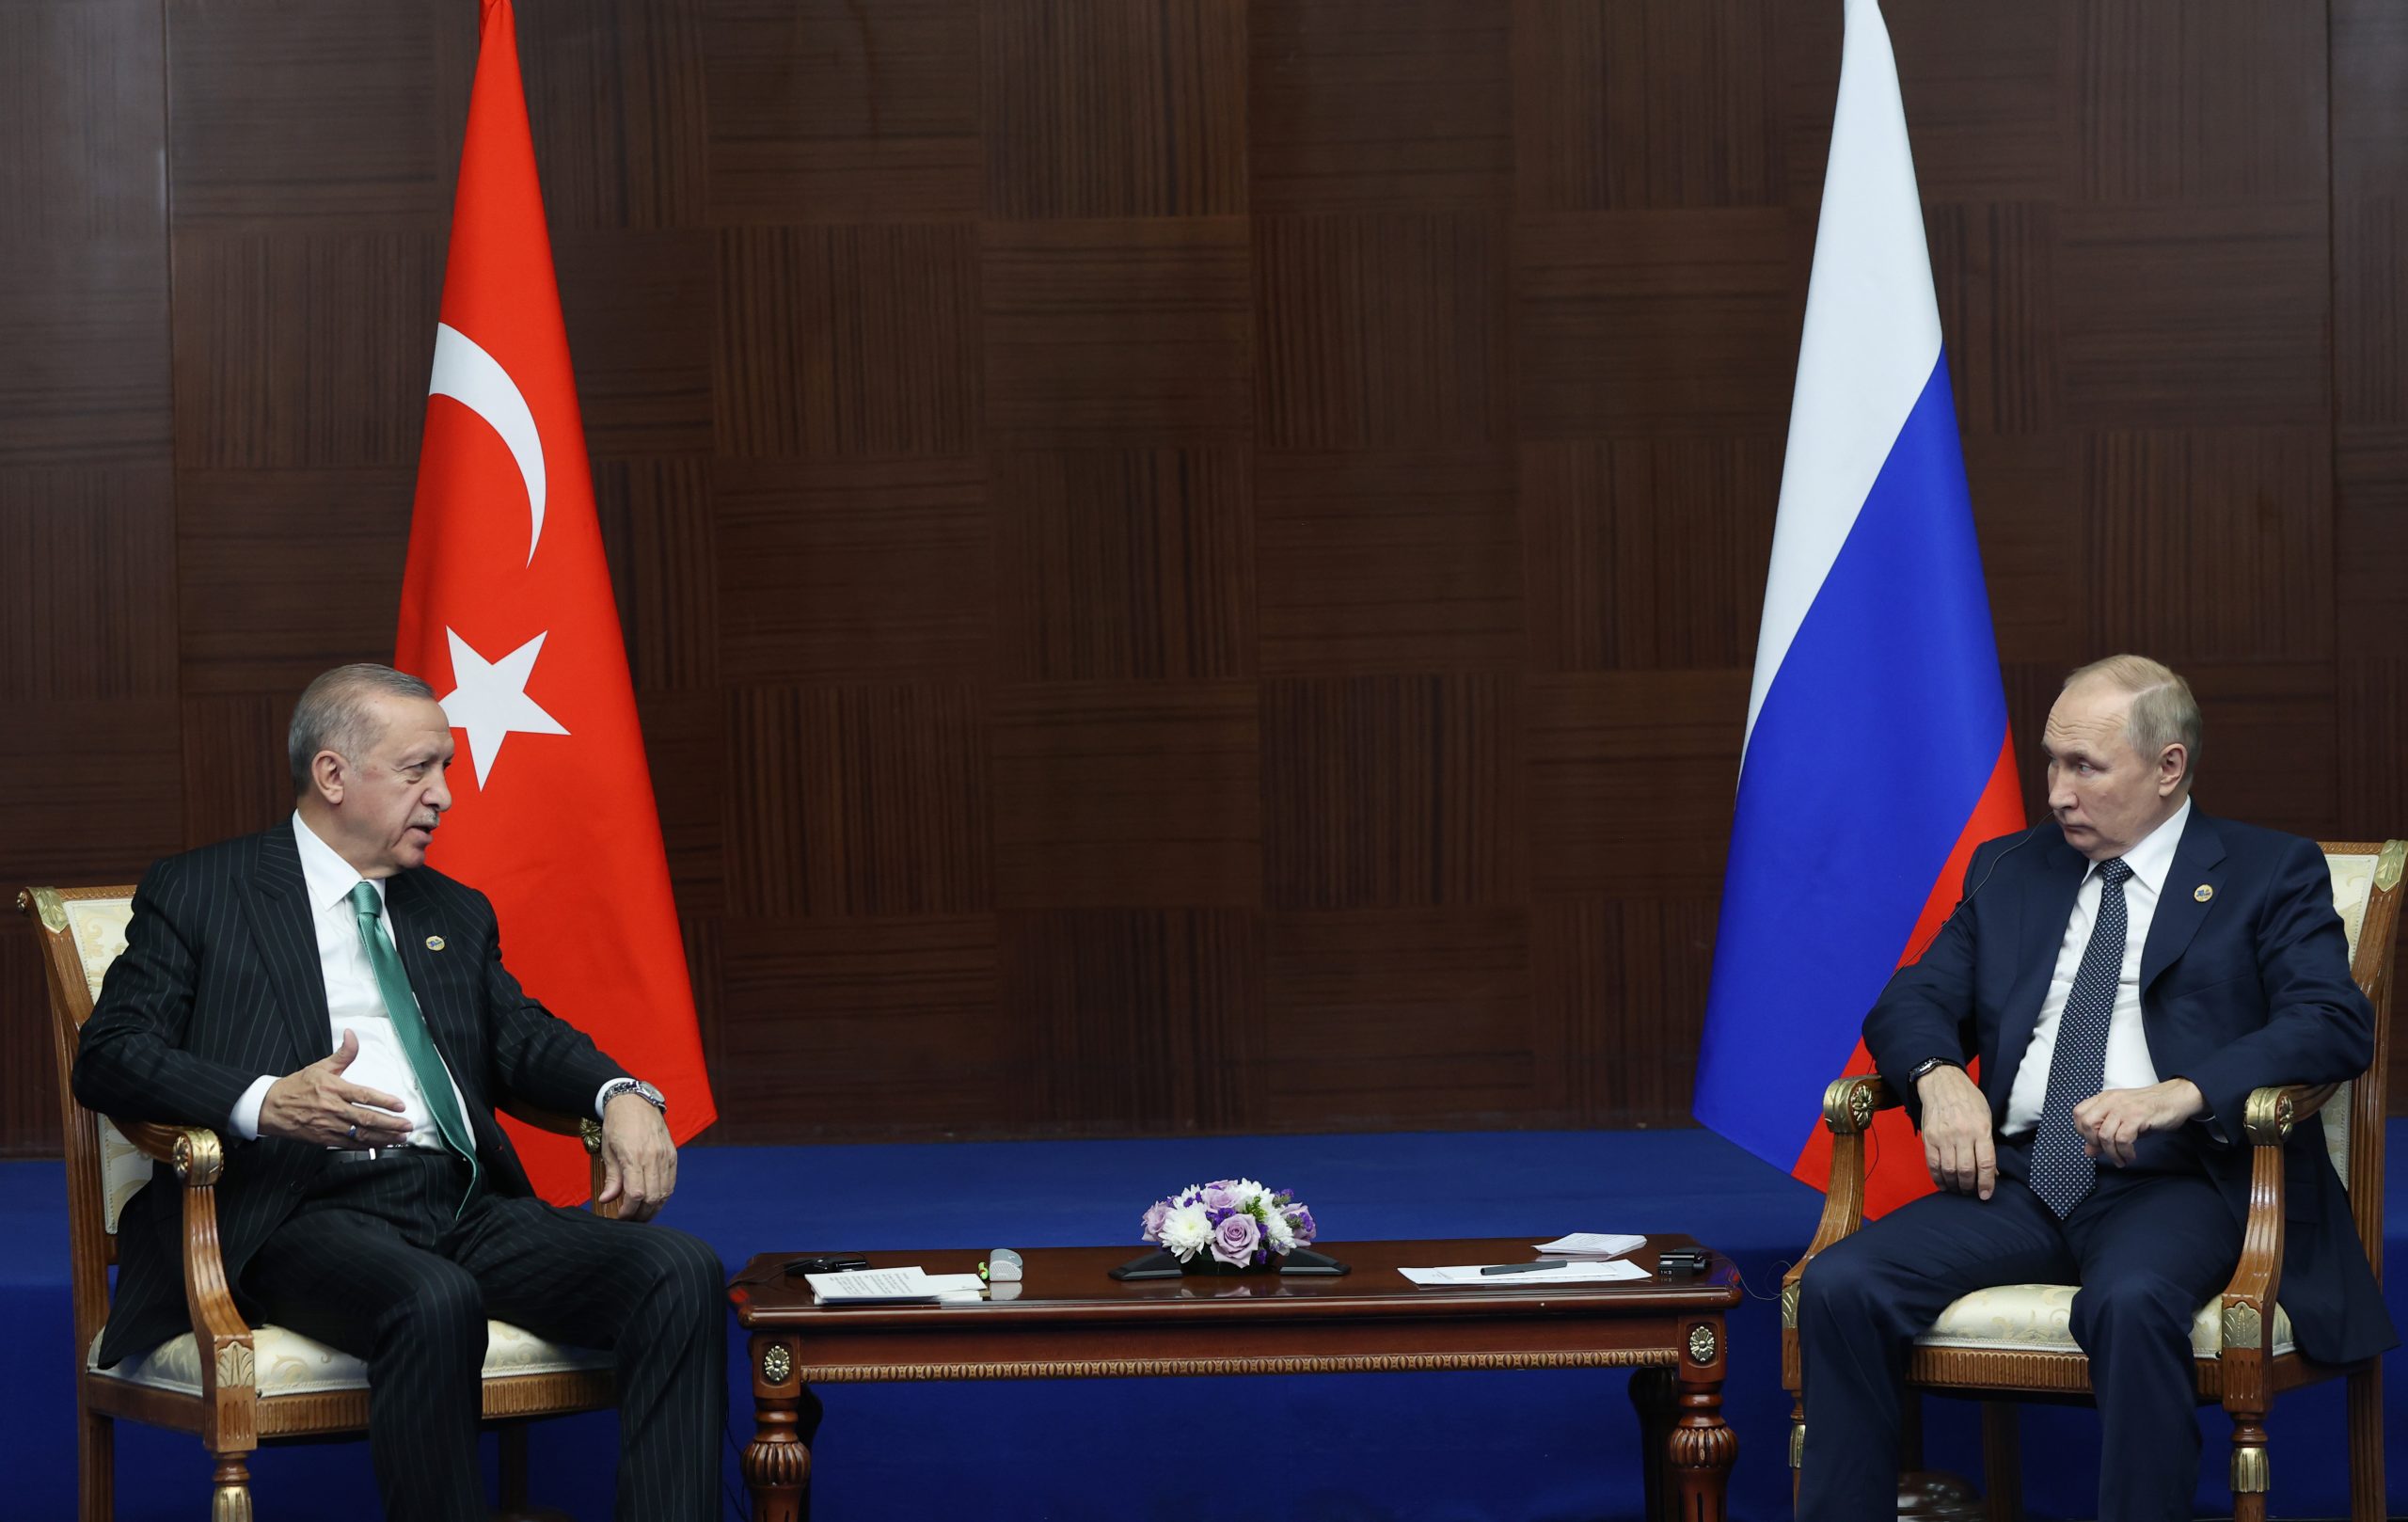 Russia: Differences with Turkey over Syria, Resolving them Through Negotiations